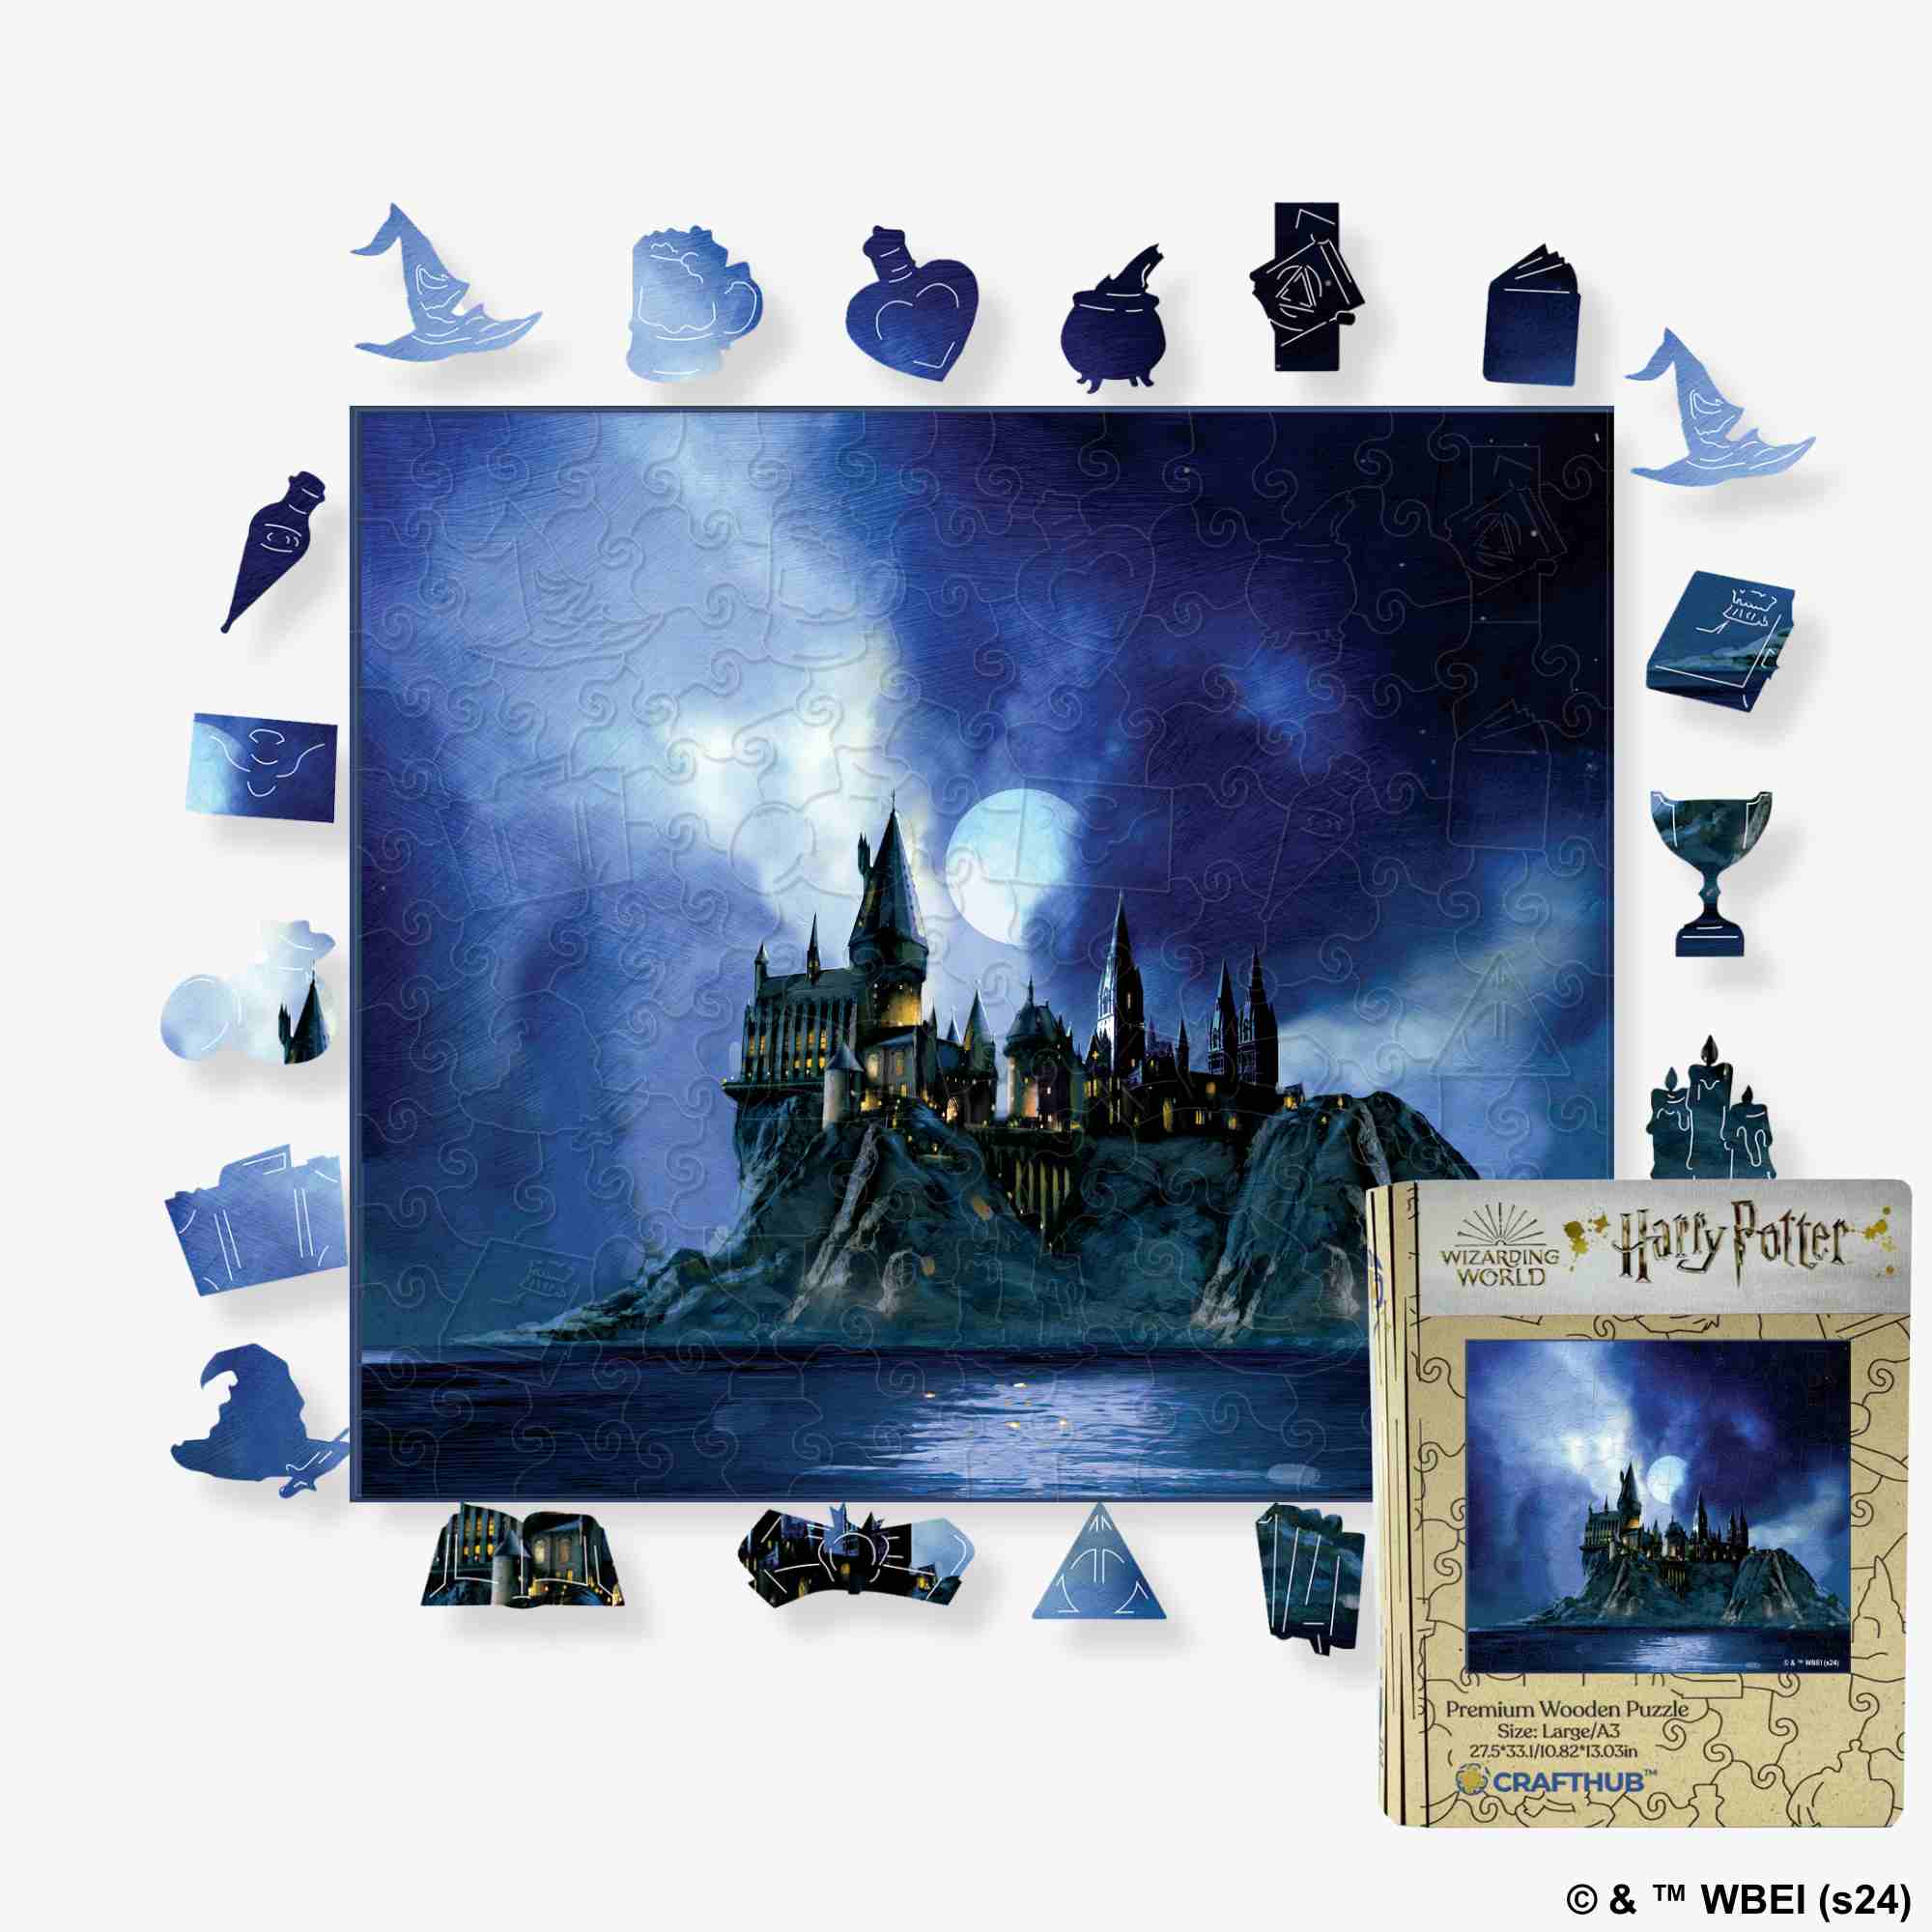 Animal Jigsaw Puzzle > Wooden Jigsaw Puzzle > Jigsaw Puzzle A4 + Wooden Gift Box Harry Potter - Starry Hogwarts Castle Wooden Jigsaw Puzzle